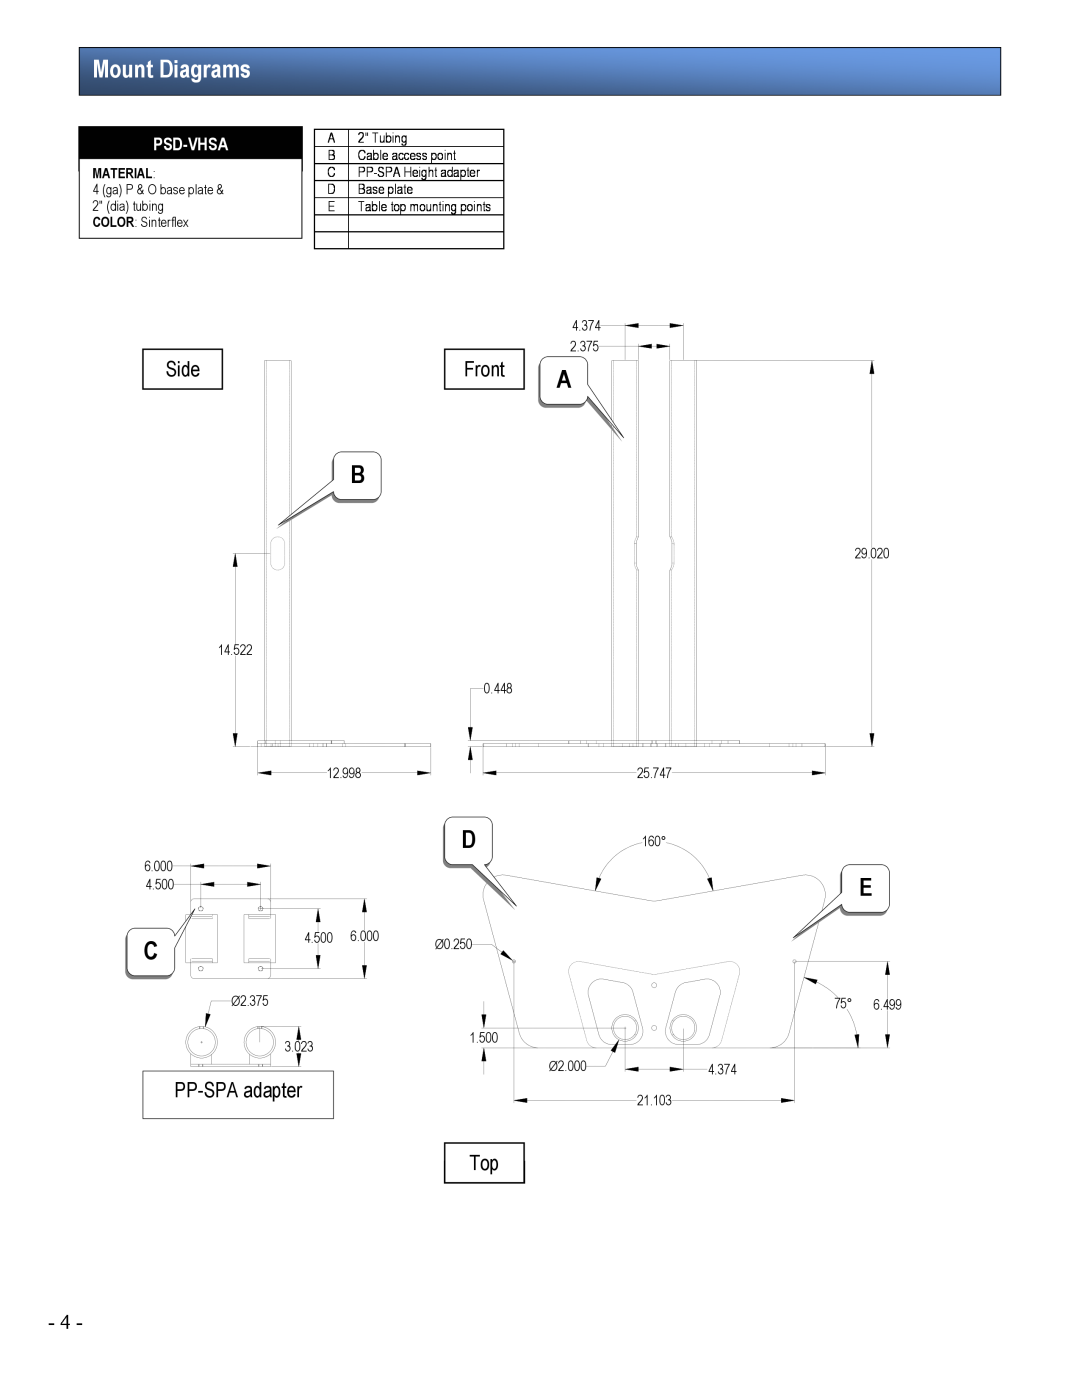 Premier Mounts PSD-VHSA installation manual Mount Diagrams, Side, Front, PP-SPA adapter, Psd-Vhsa, Material 